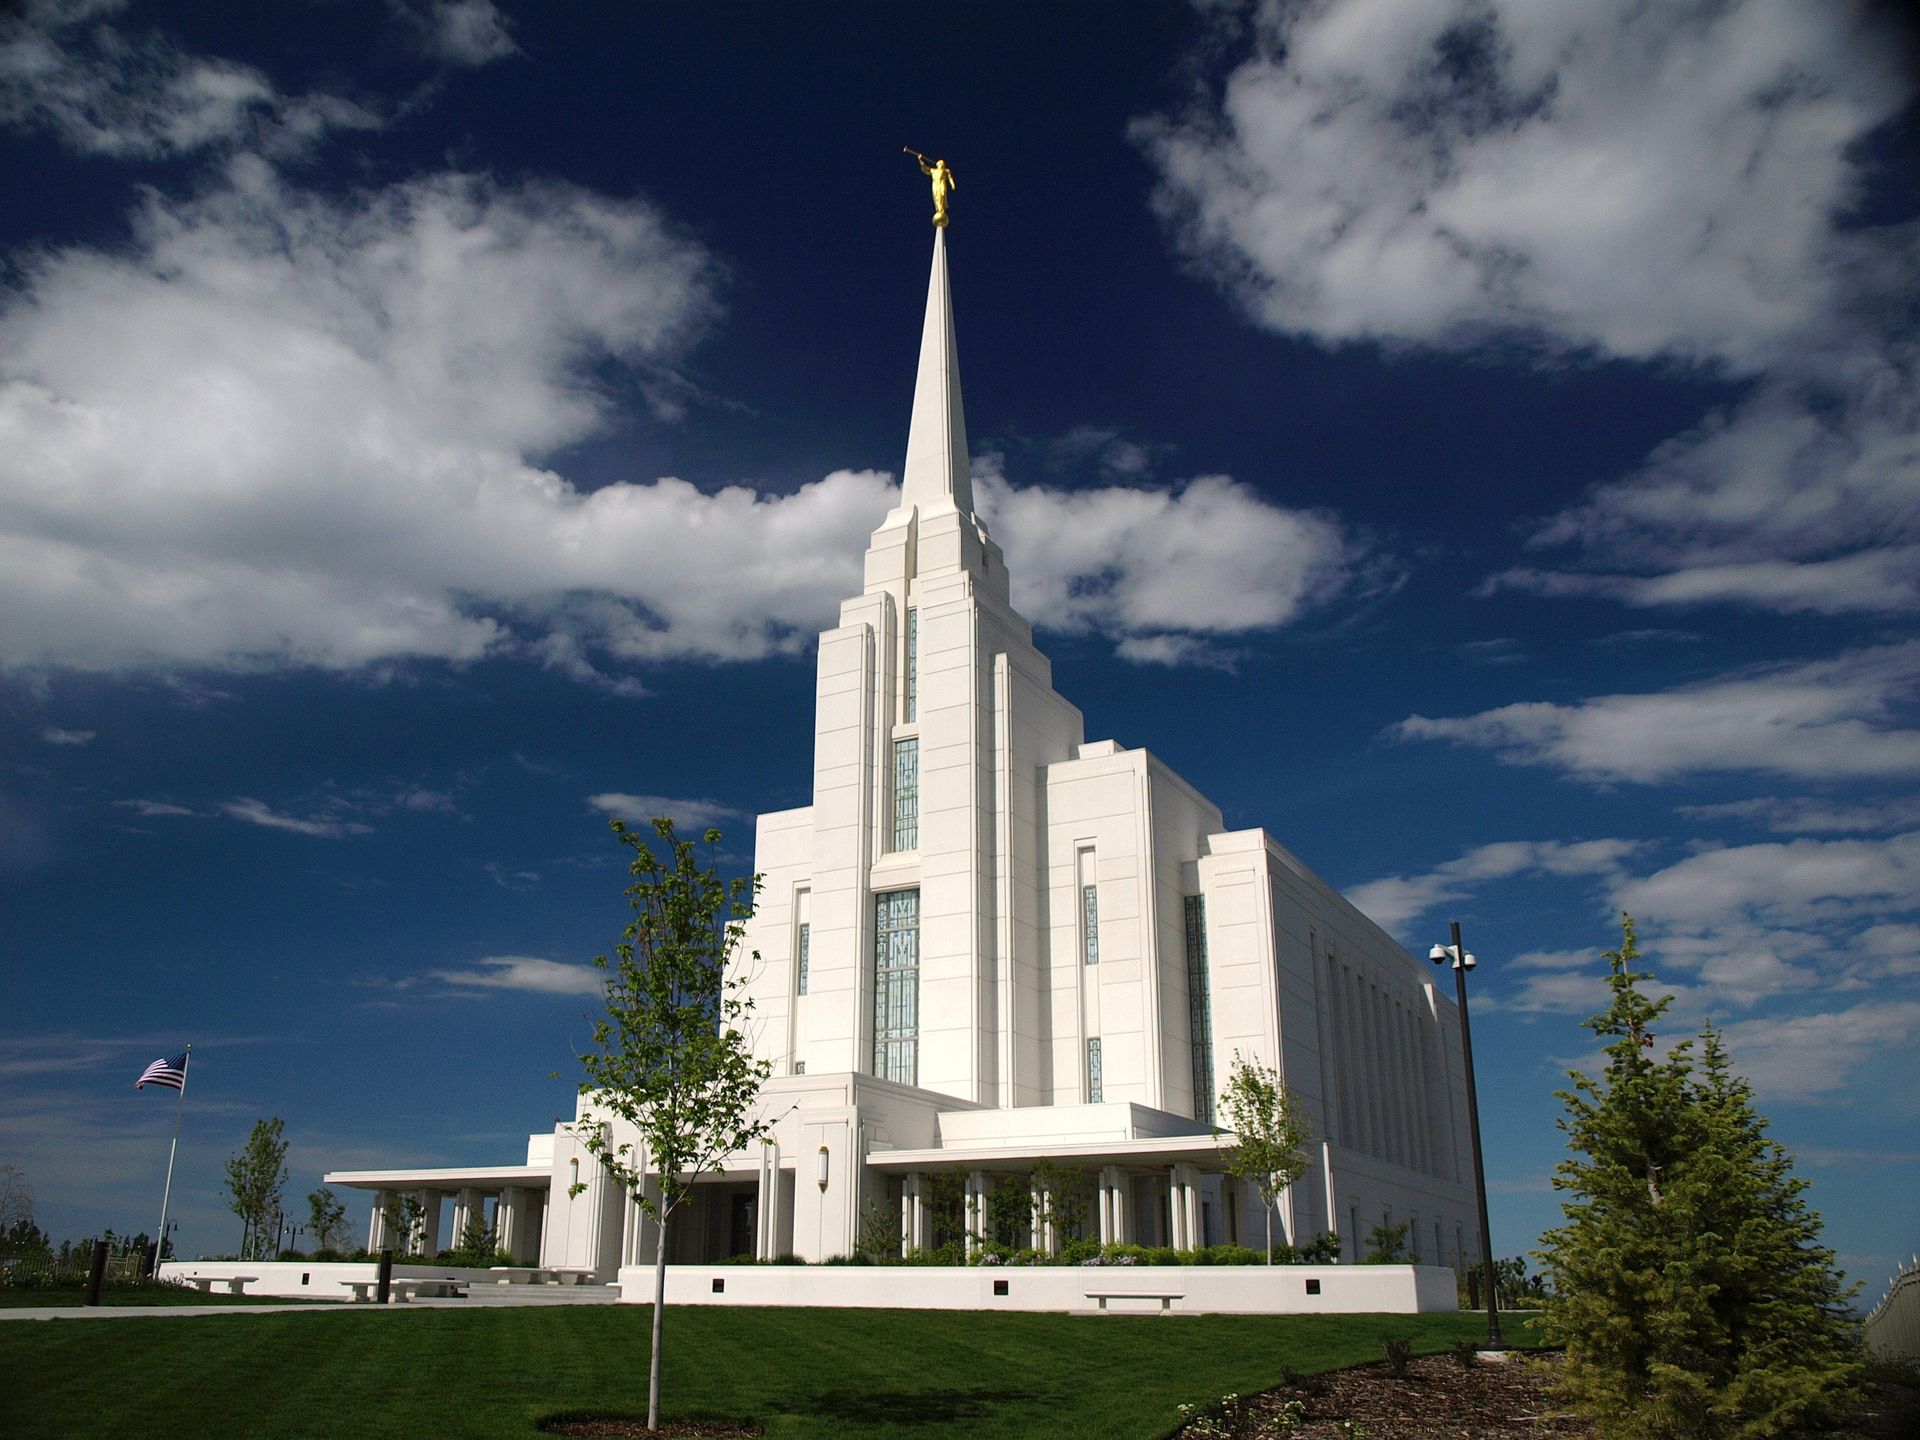 The Rexburg Idaho Temple on a partly cloudy day.